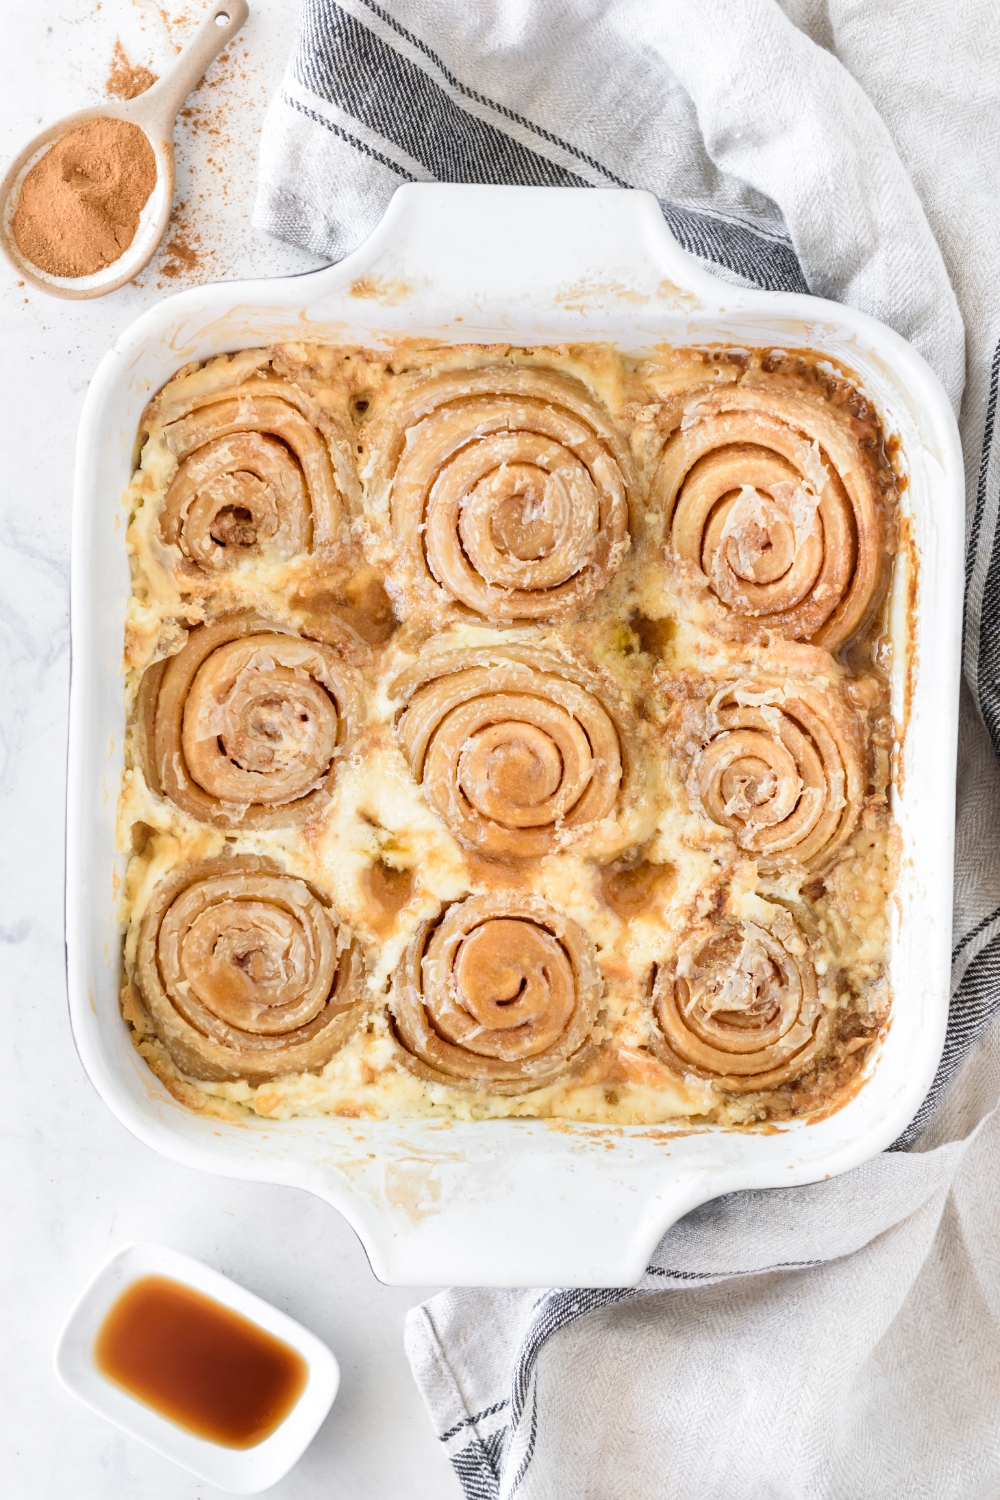 A baking dish filled with freshly baked cinnamon rolls covered in a cream.